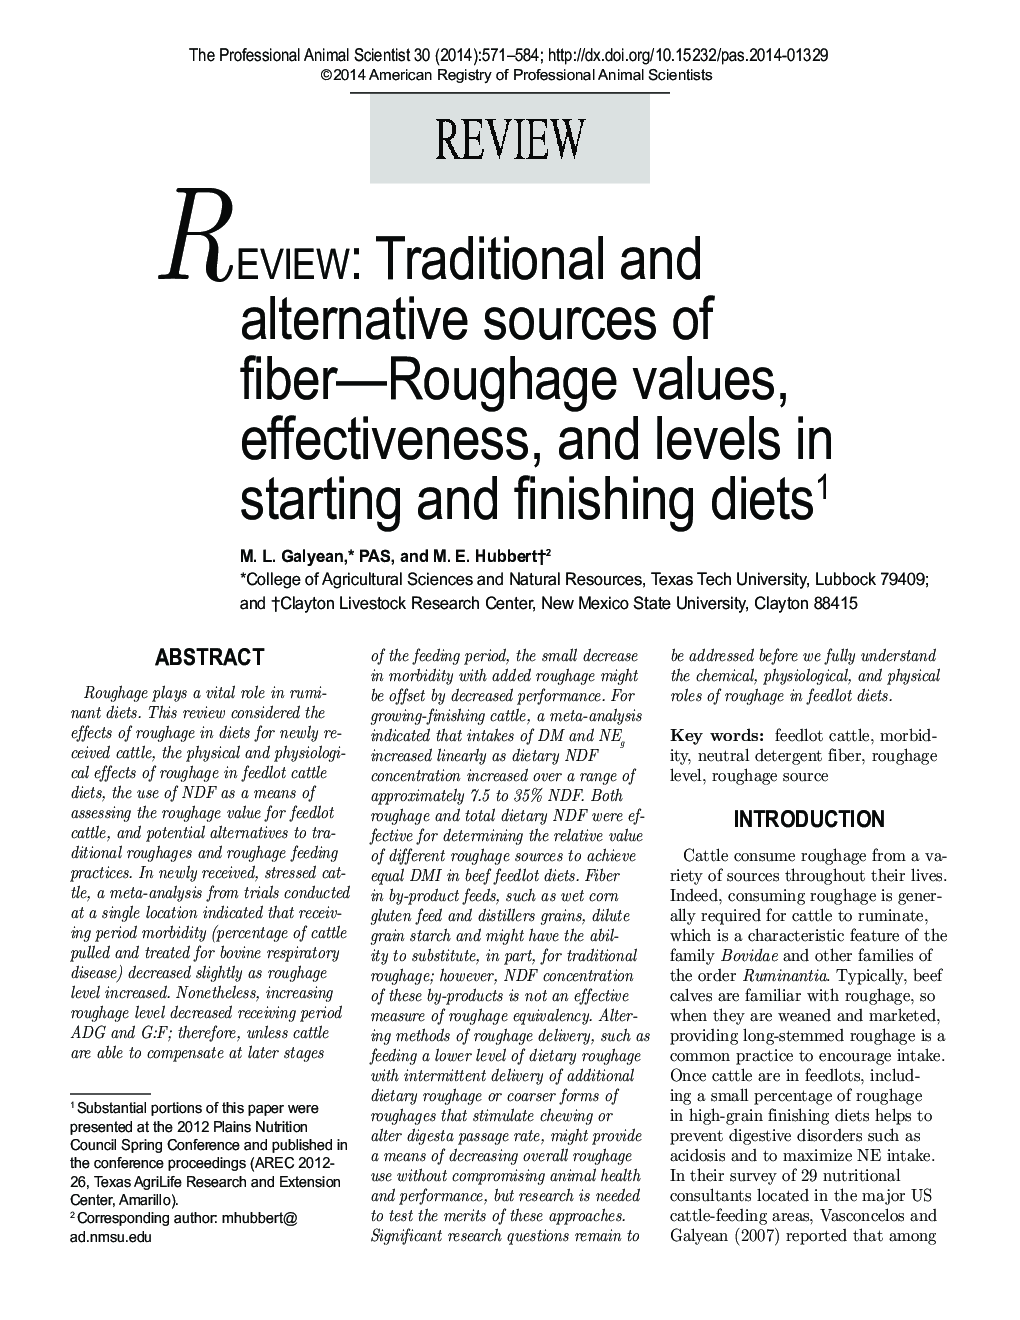 REVIEW: Traditional and alternative sources of fiber-Roughage values, effectiveness, and levels in starting and finishing diets1